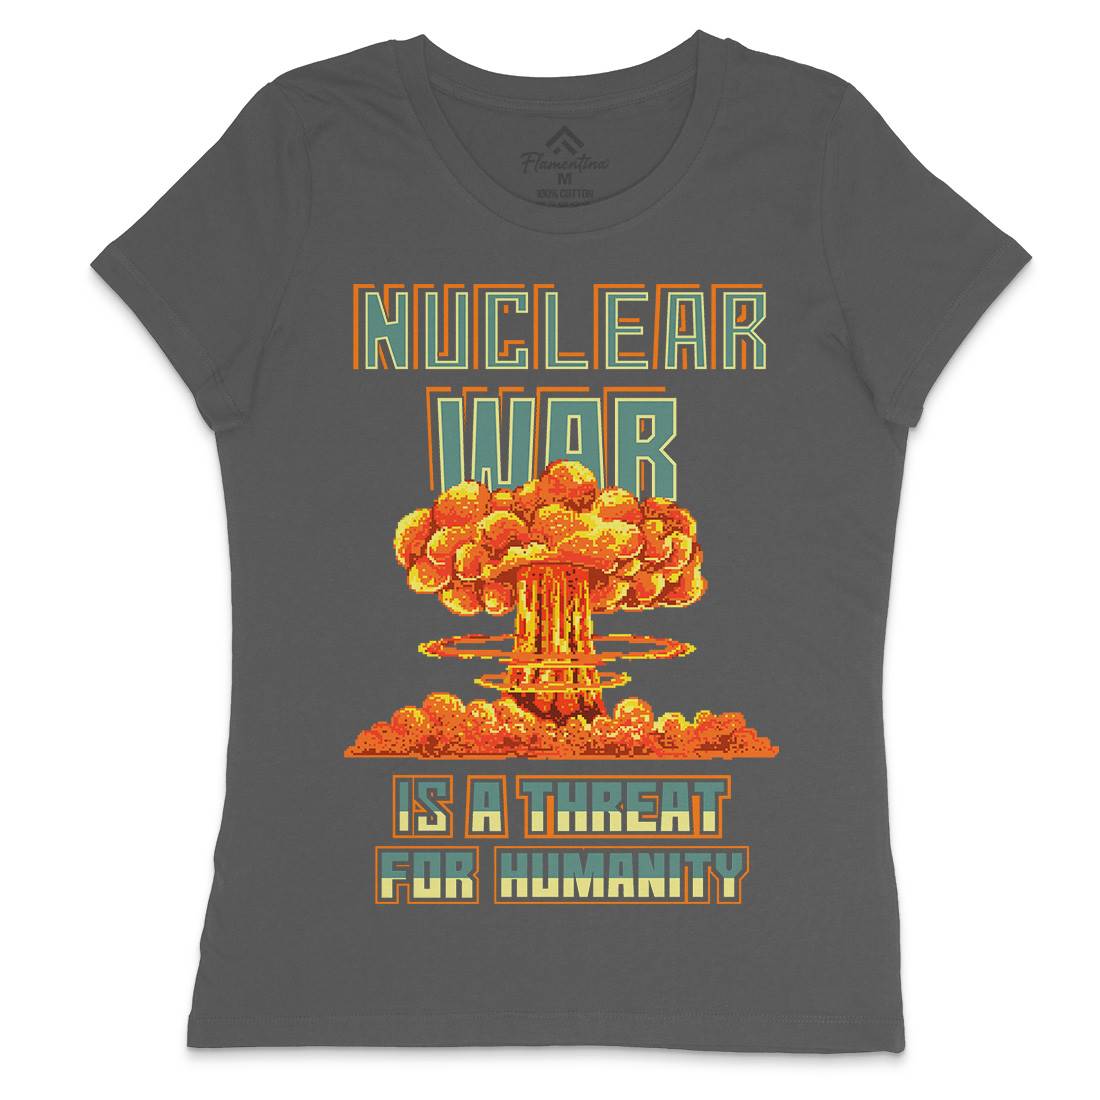 Nuclear War Is A Threat For Humanity Womens Crew Neck T-Shirt Army B941